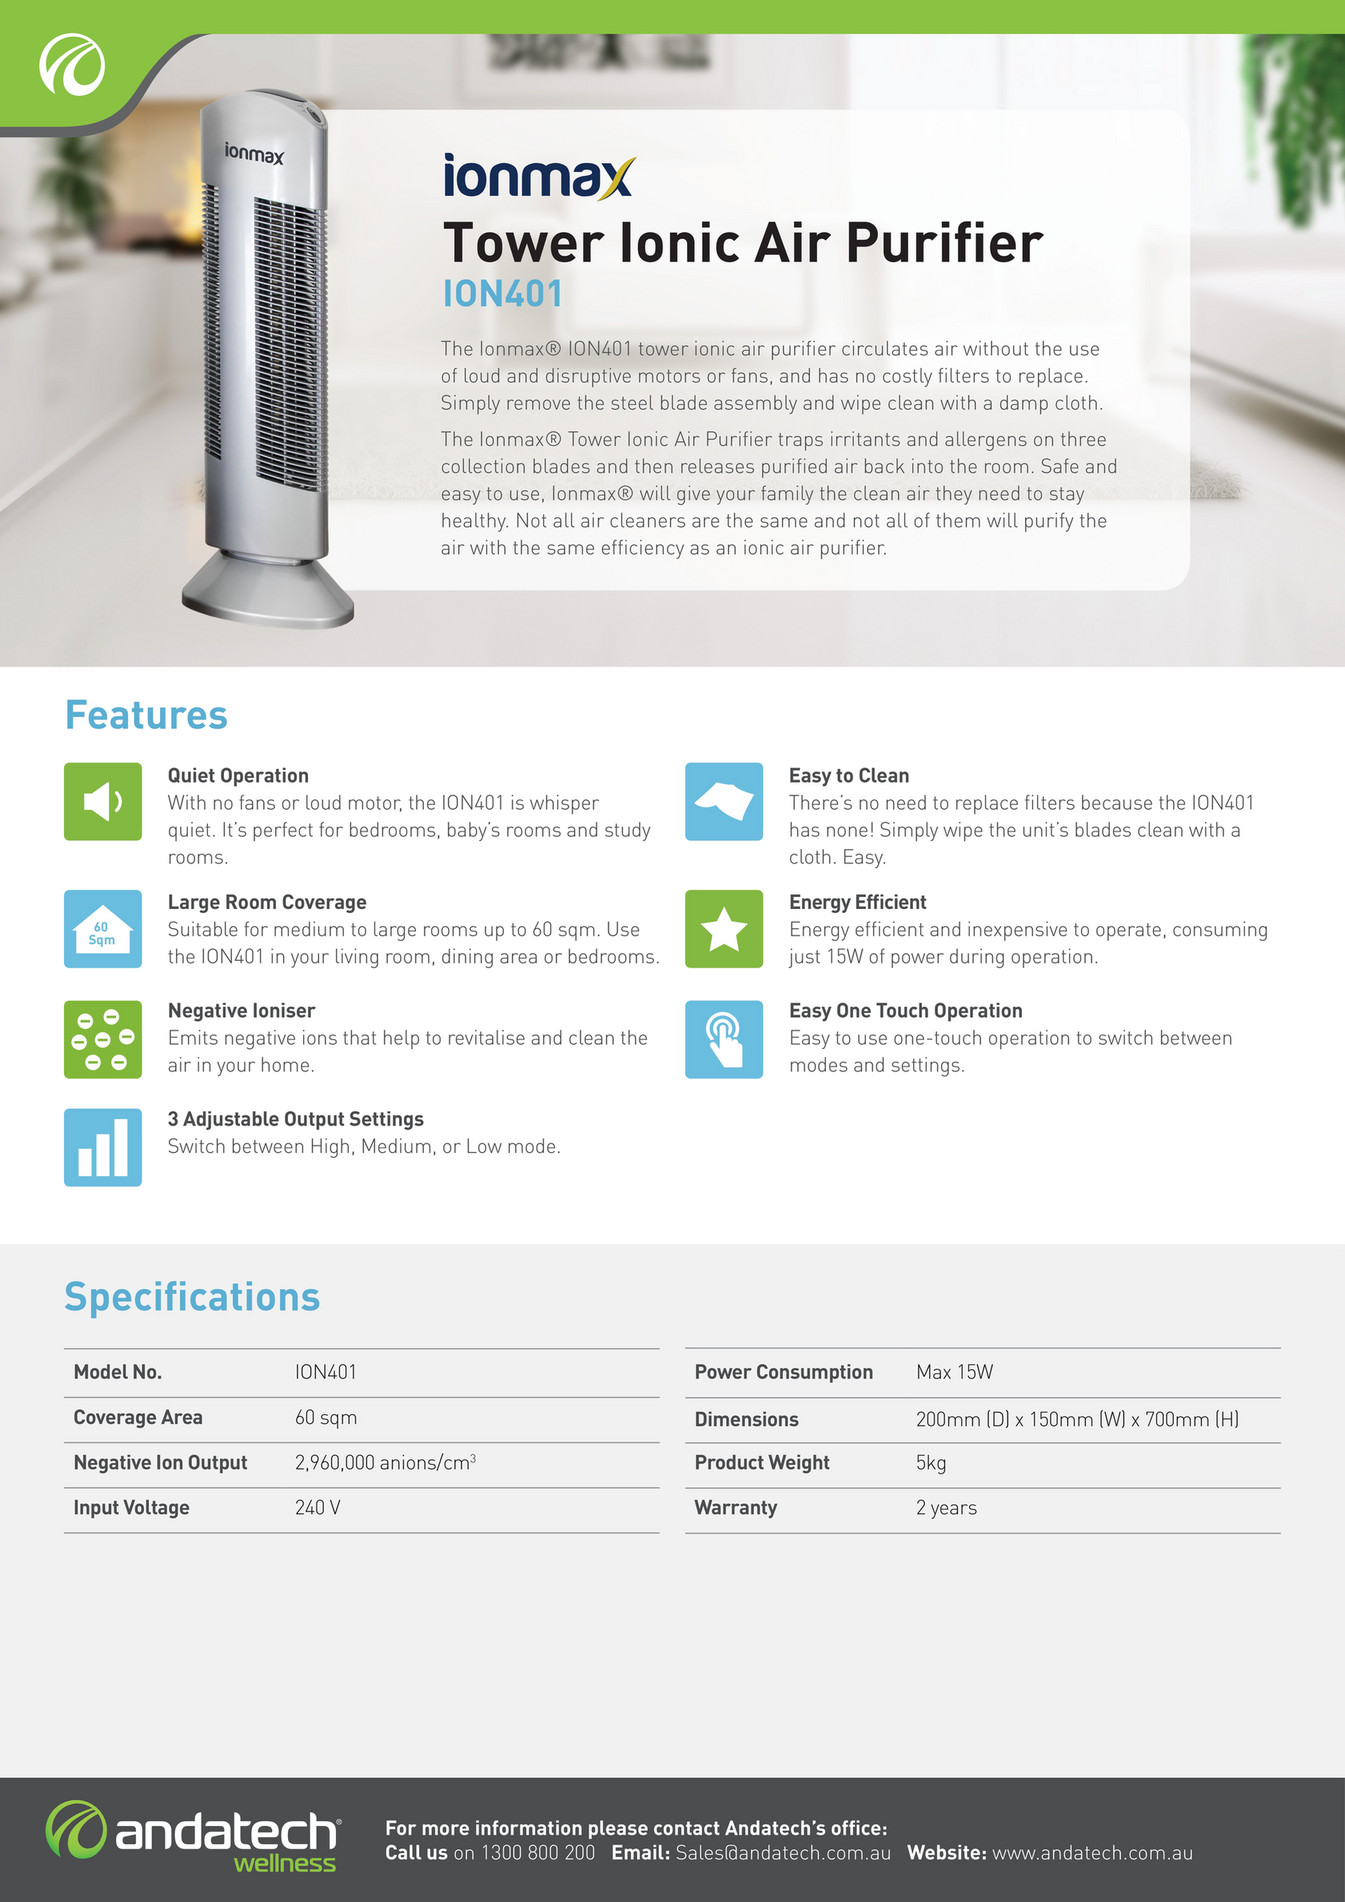 Andatech Ionmax Ion401 Ionic Air Purifier Fact Sheet Page 1 Created With